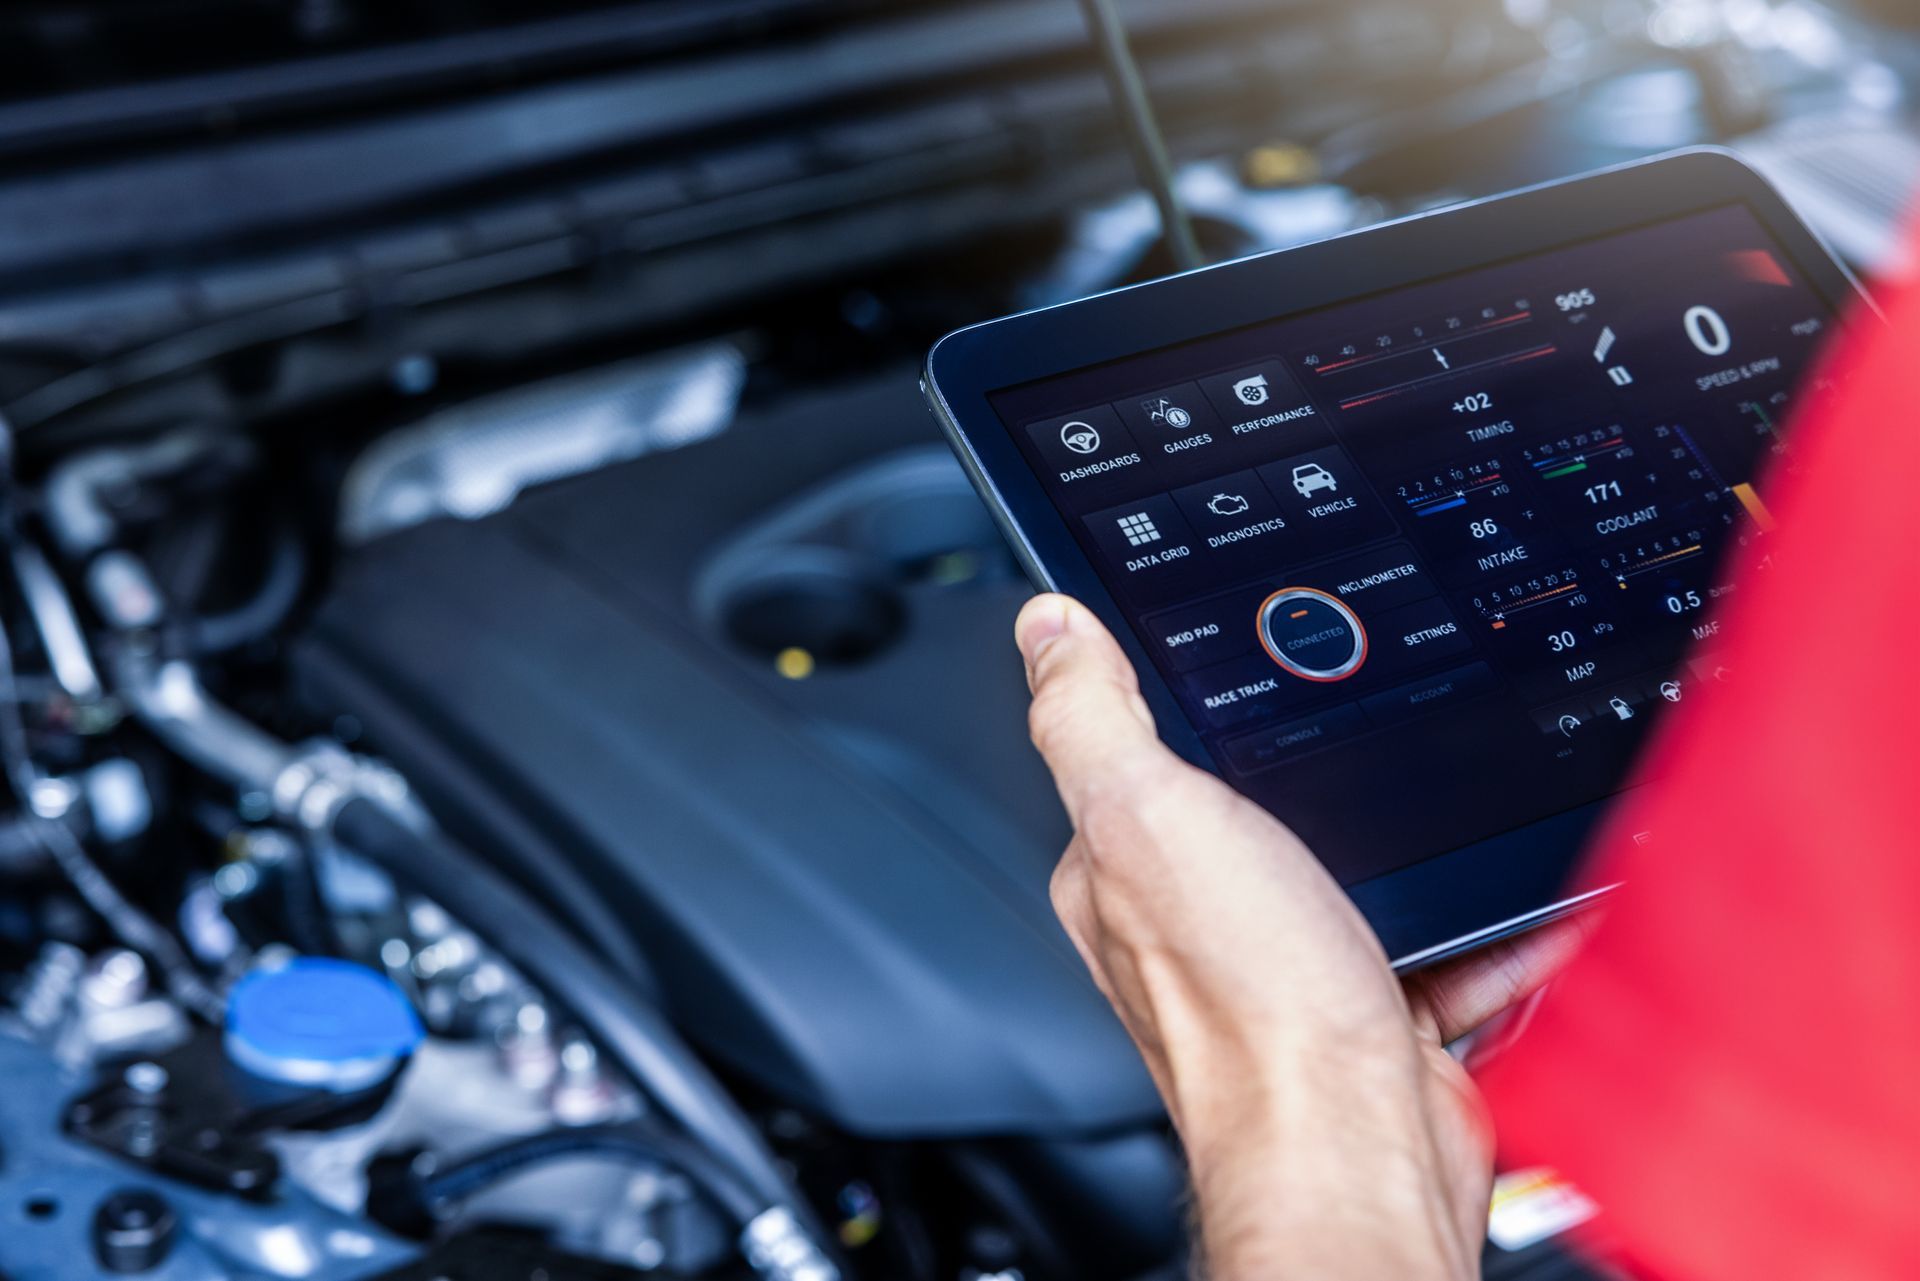 Digital Inspections at ﻿Jerry's Auto Repair﻿ in ﻿Pullman, WA﻿